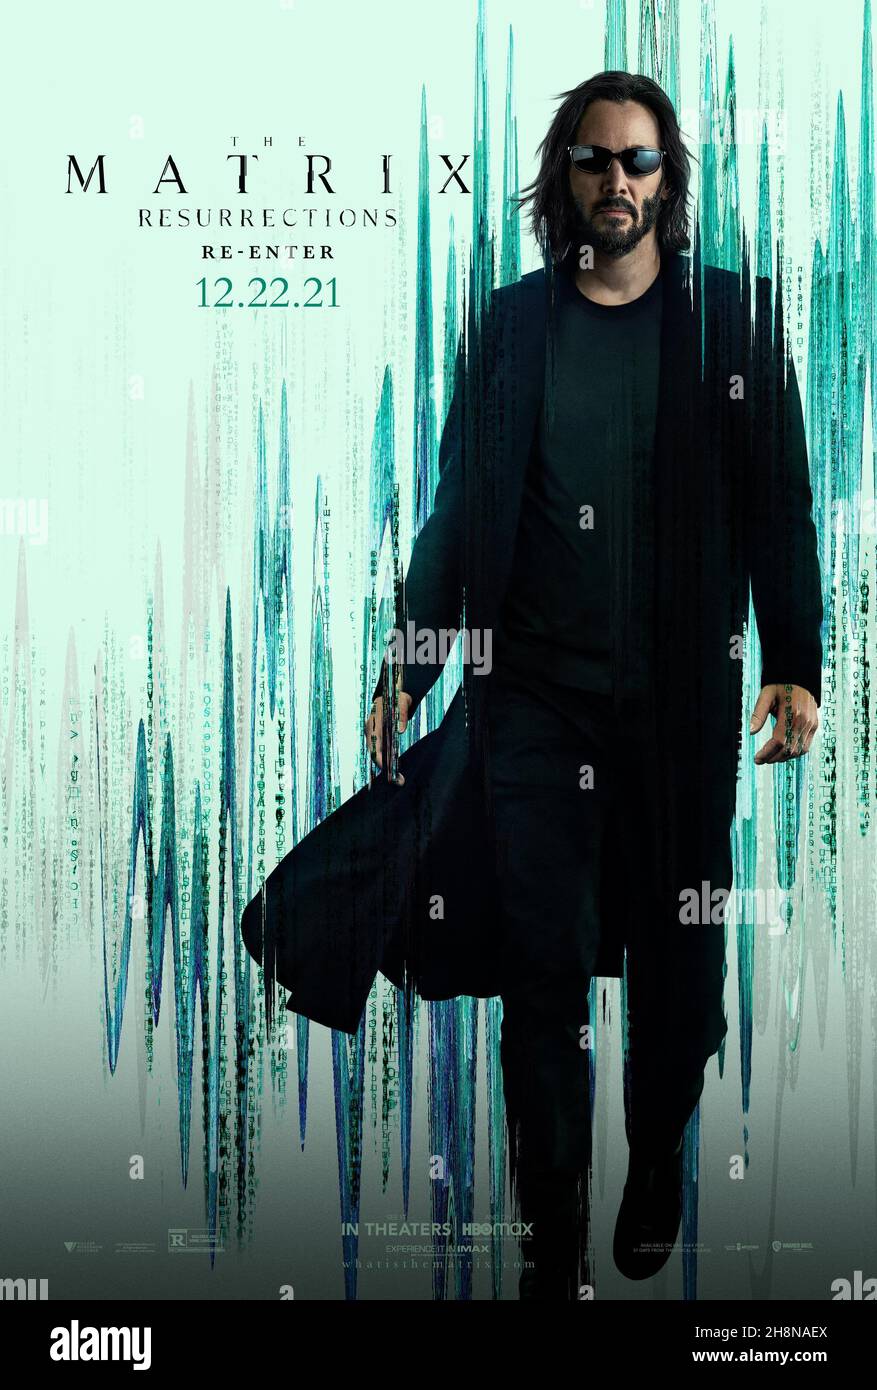 KEANU REEVES in THE MATRIX RESURRECTIONS (2021), directed by LANA WACHOWSKI. Credit: Village Roadshow Pictures/NPV Entertainment/Silver Pictures/Warner Bros. / Album Stock Photo